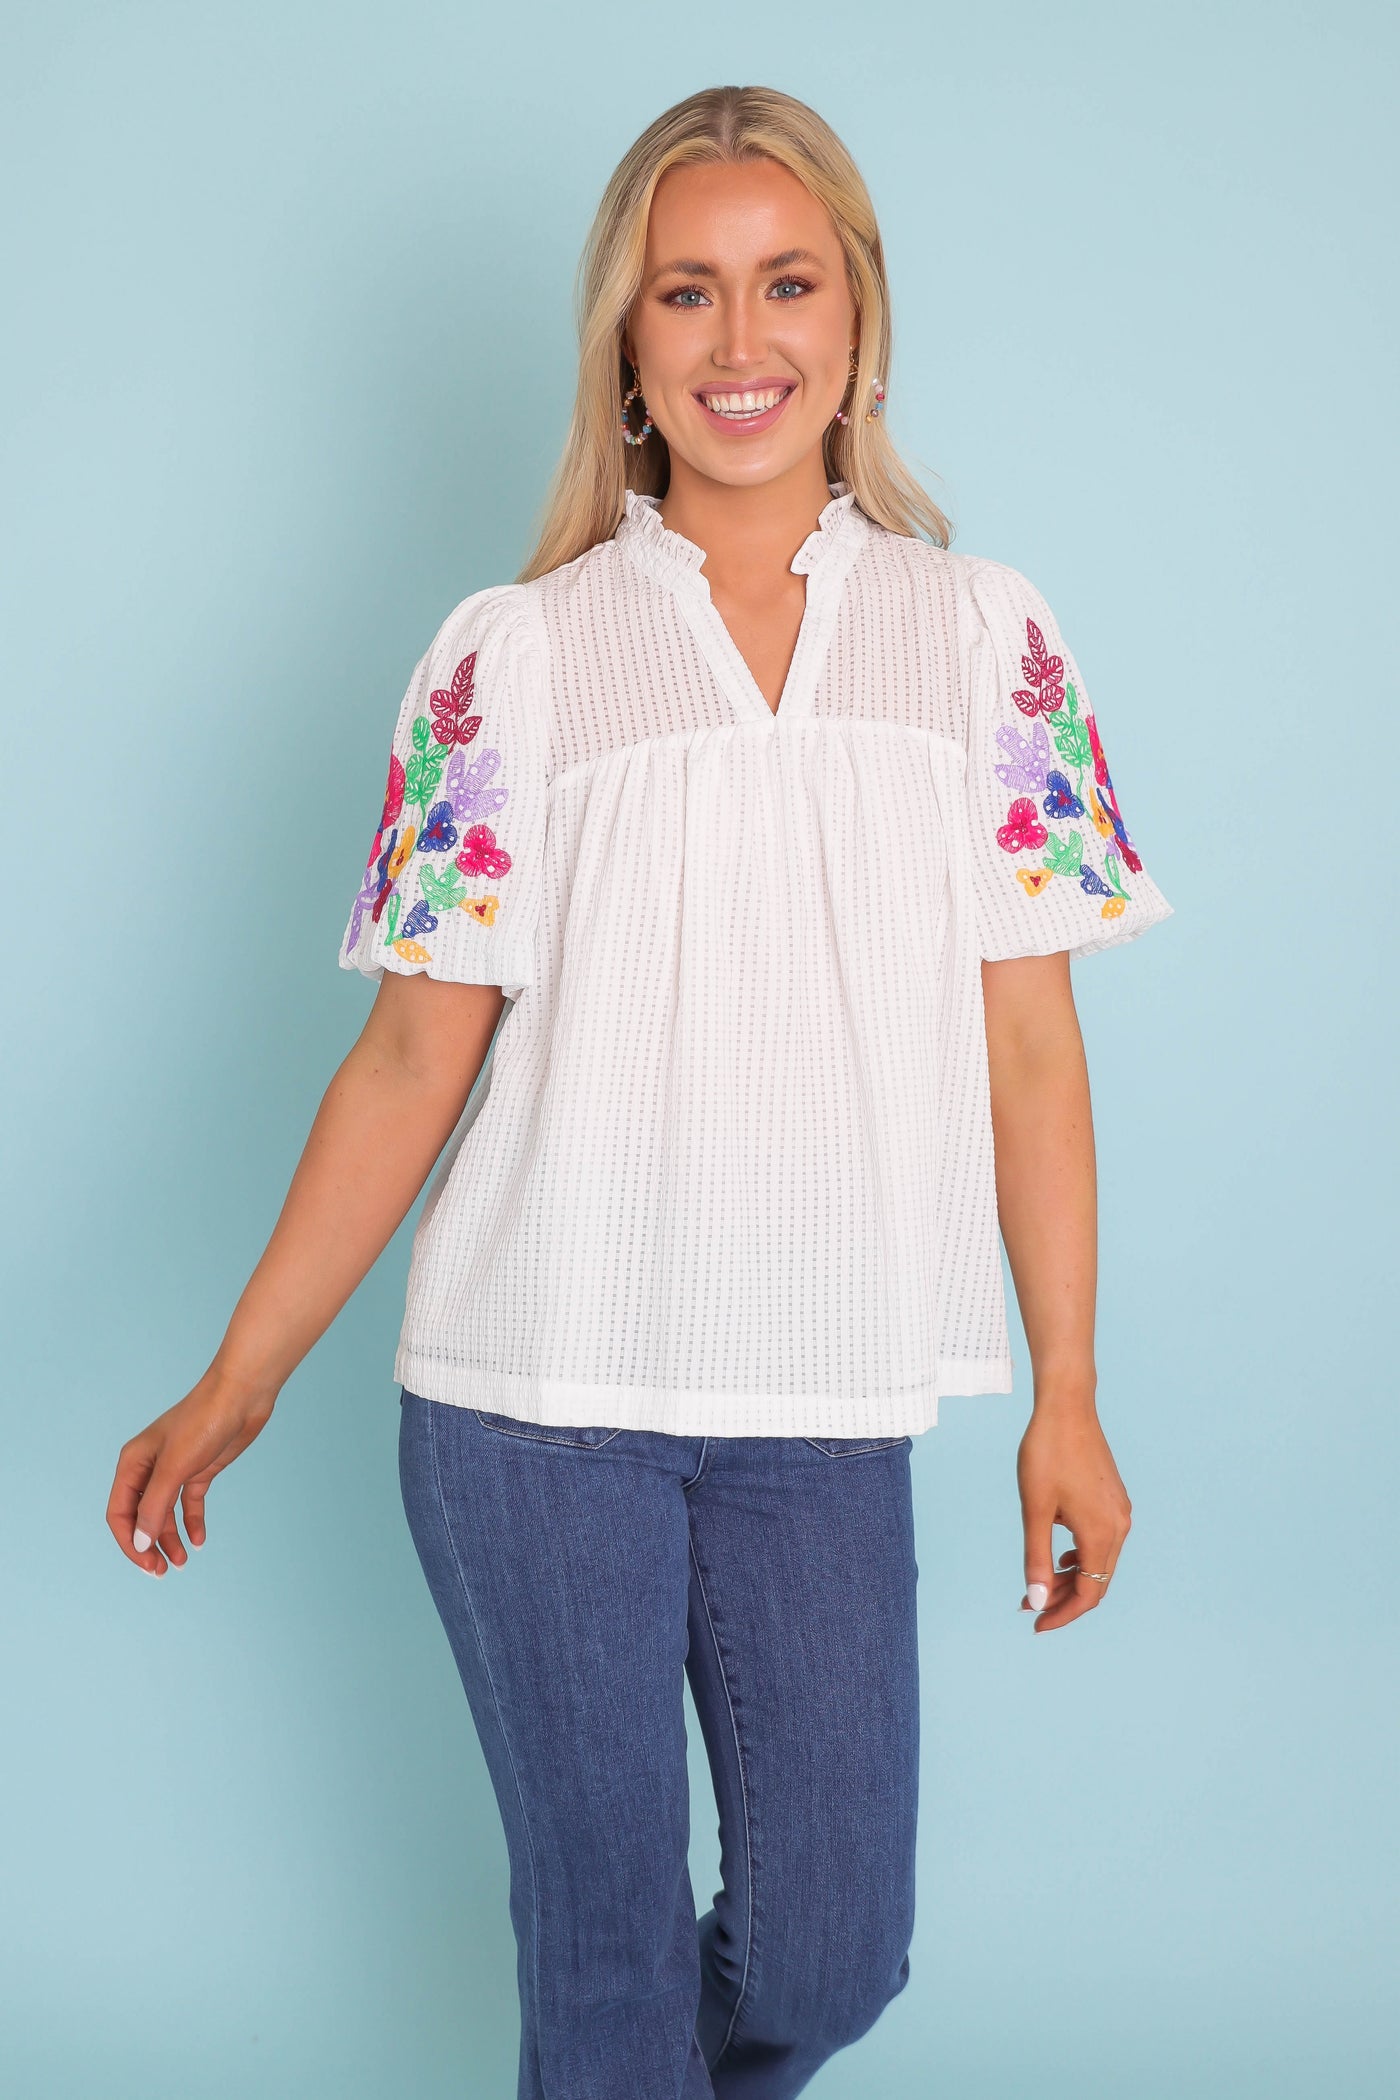 Women's Spring Tops- Women's Preppy Tops- Umgee Embroidered Top